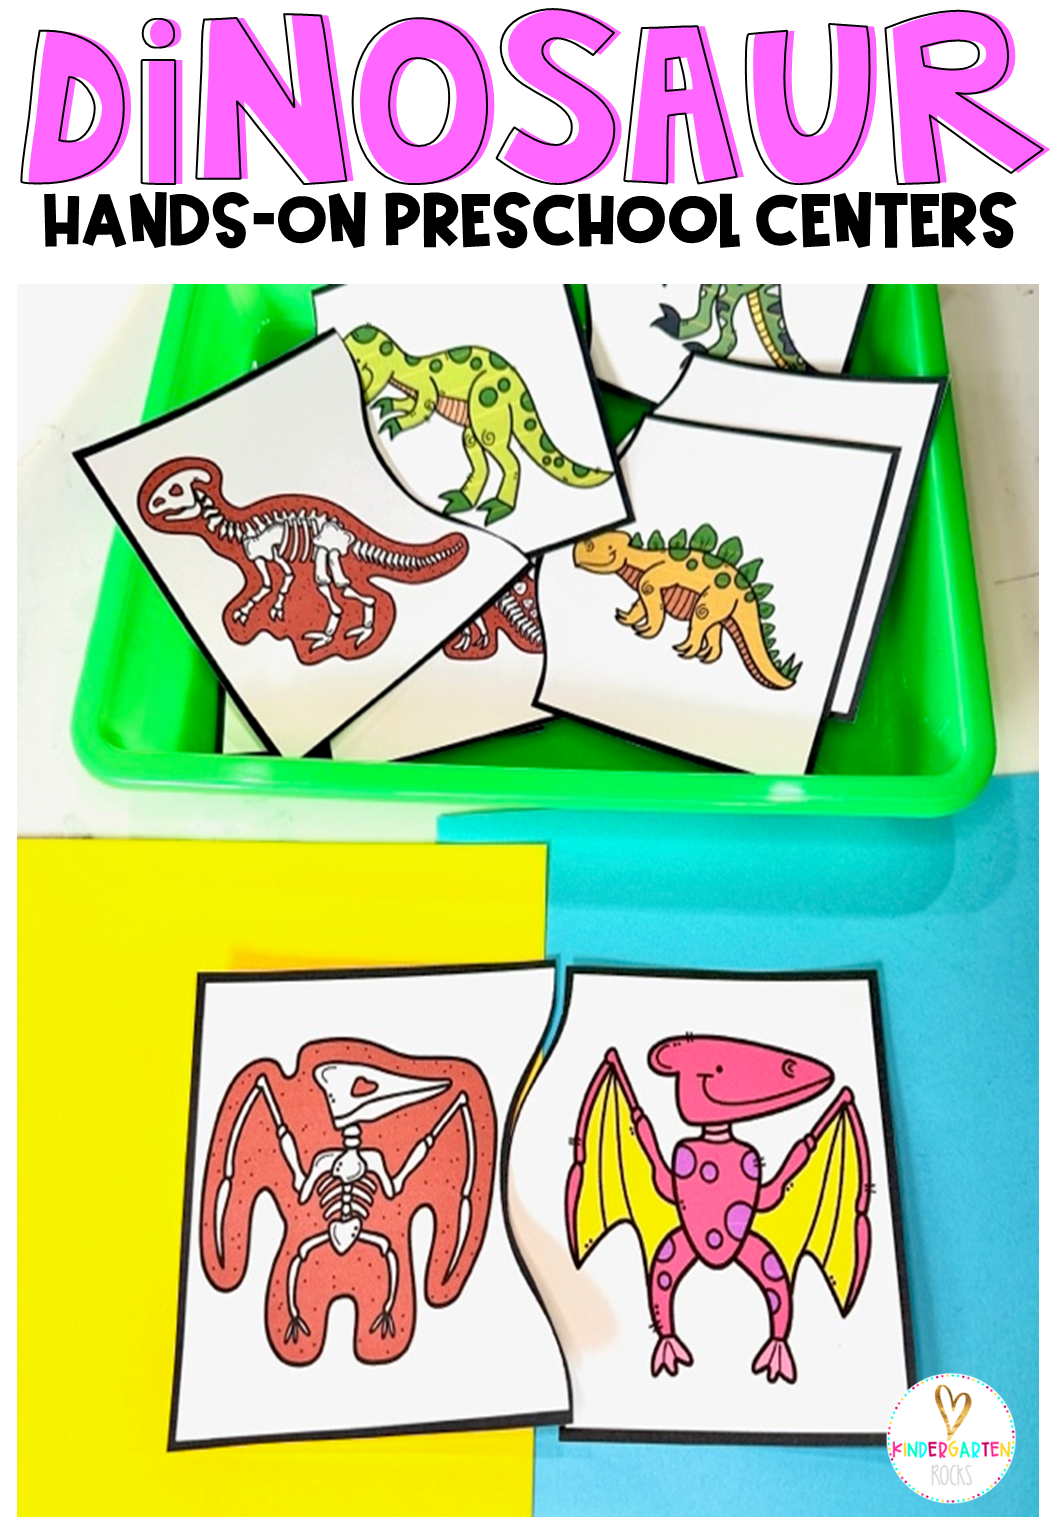 Are you looking for dinosaurs math and literacy centers for your preschool classroom? Then you will love our Dinosaur Centers and Morning Bins for the winter months of pre-k.